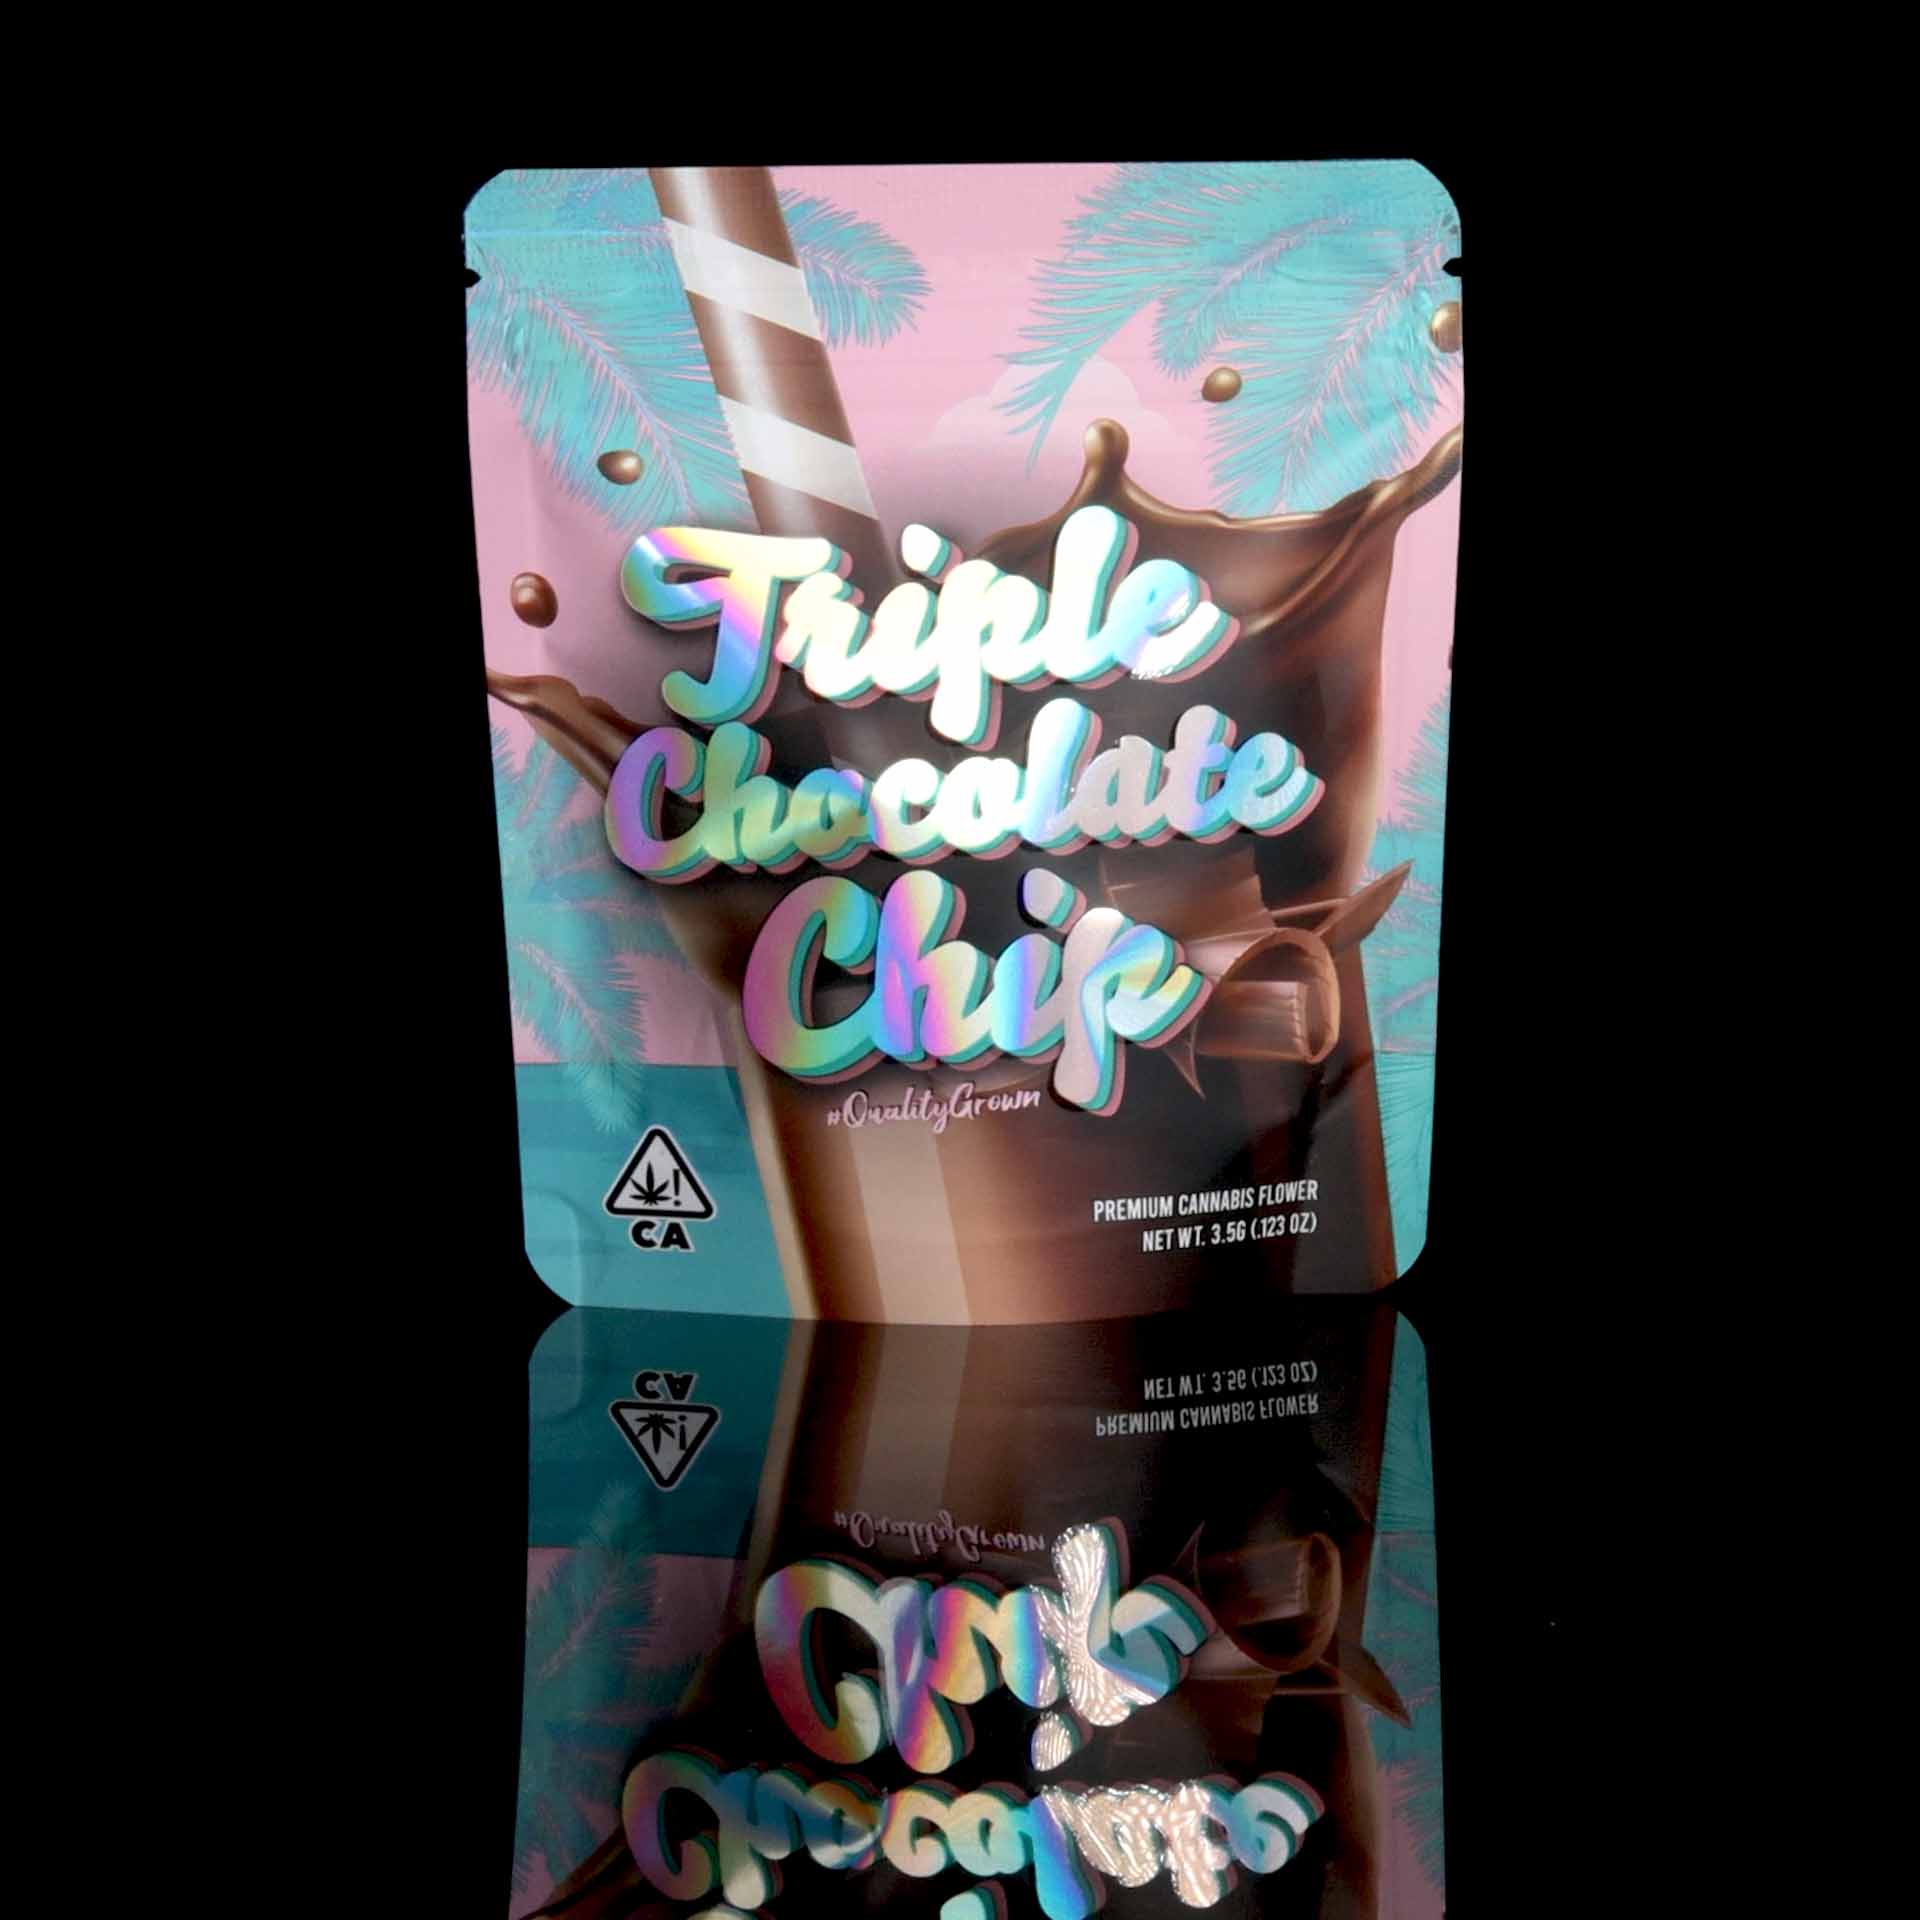 Triple Chocolate Chip by Dubz Garden and La Coz